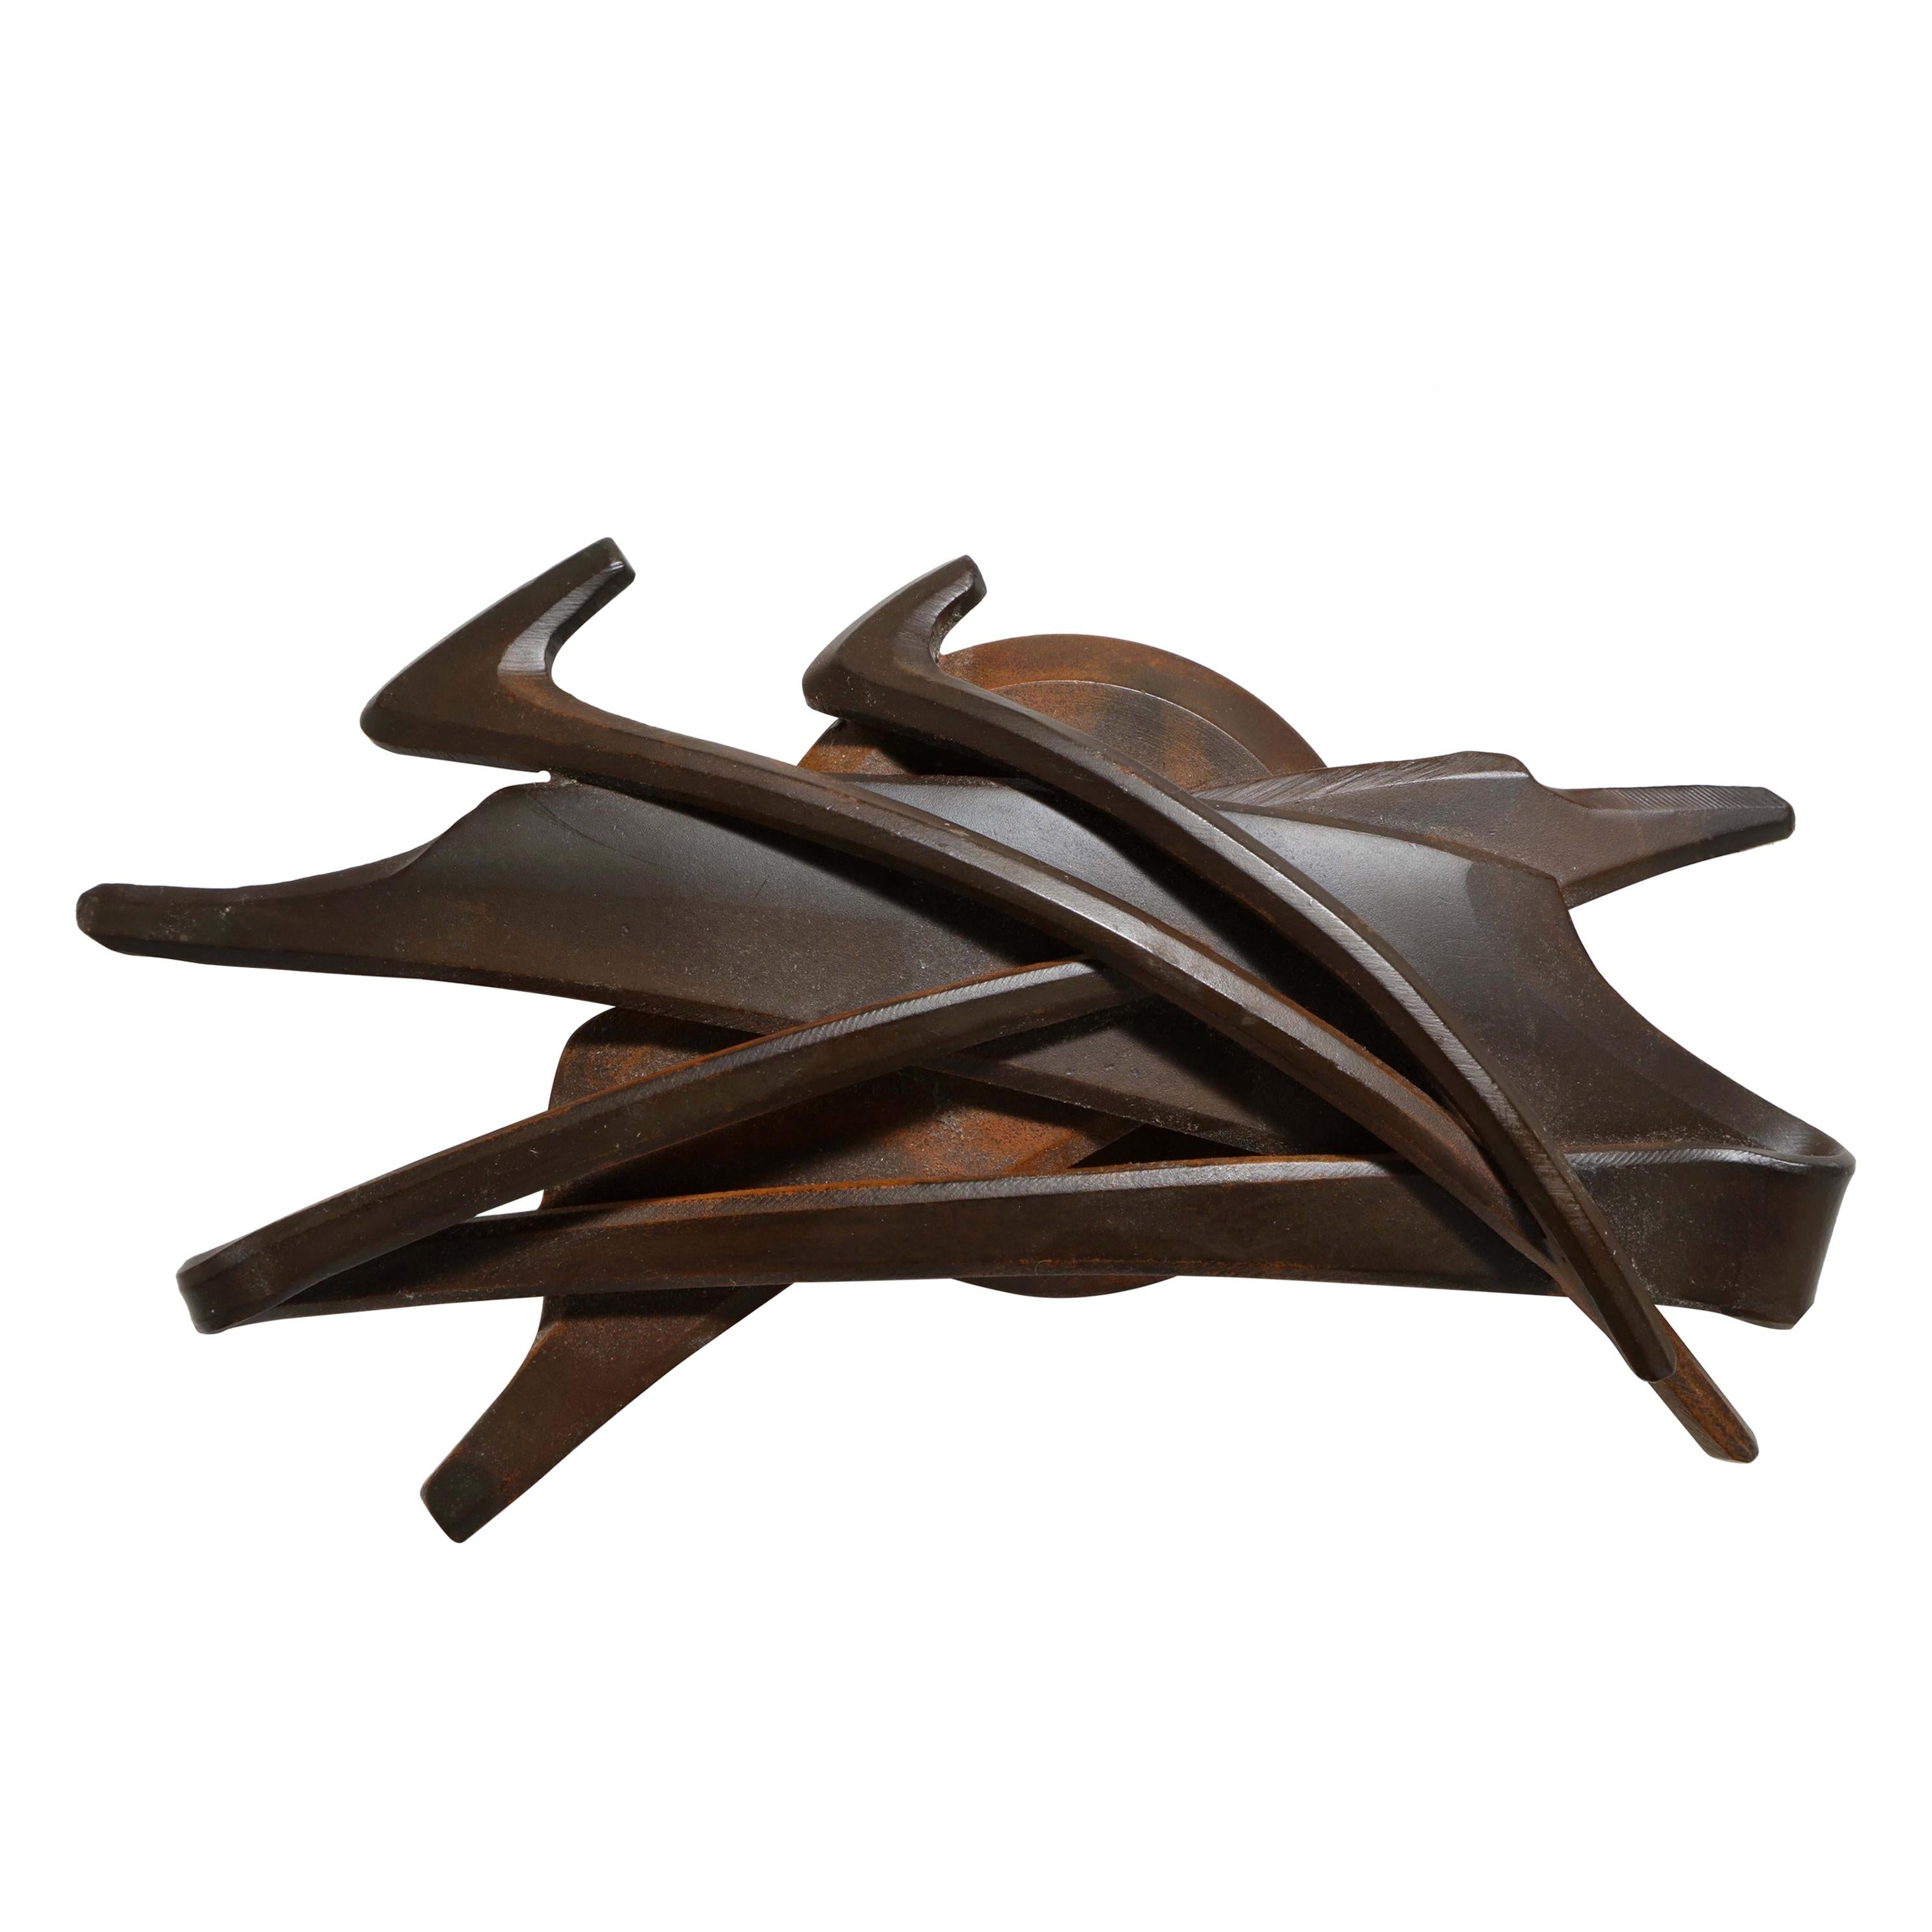 Albert Paley 1994 "Medallion" Paperweight in Blackened Steel with Bronzed Patina